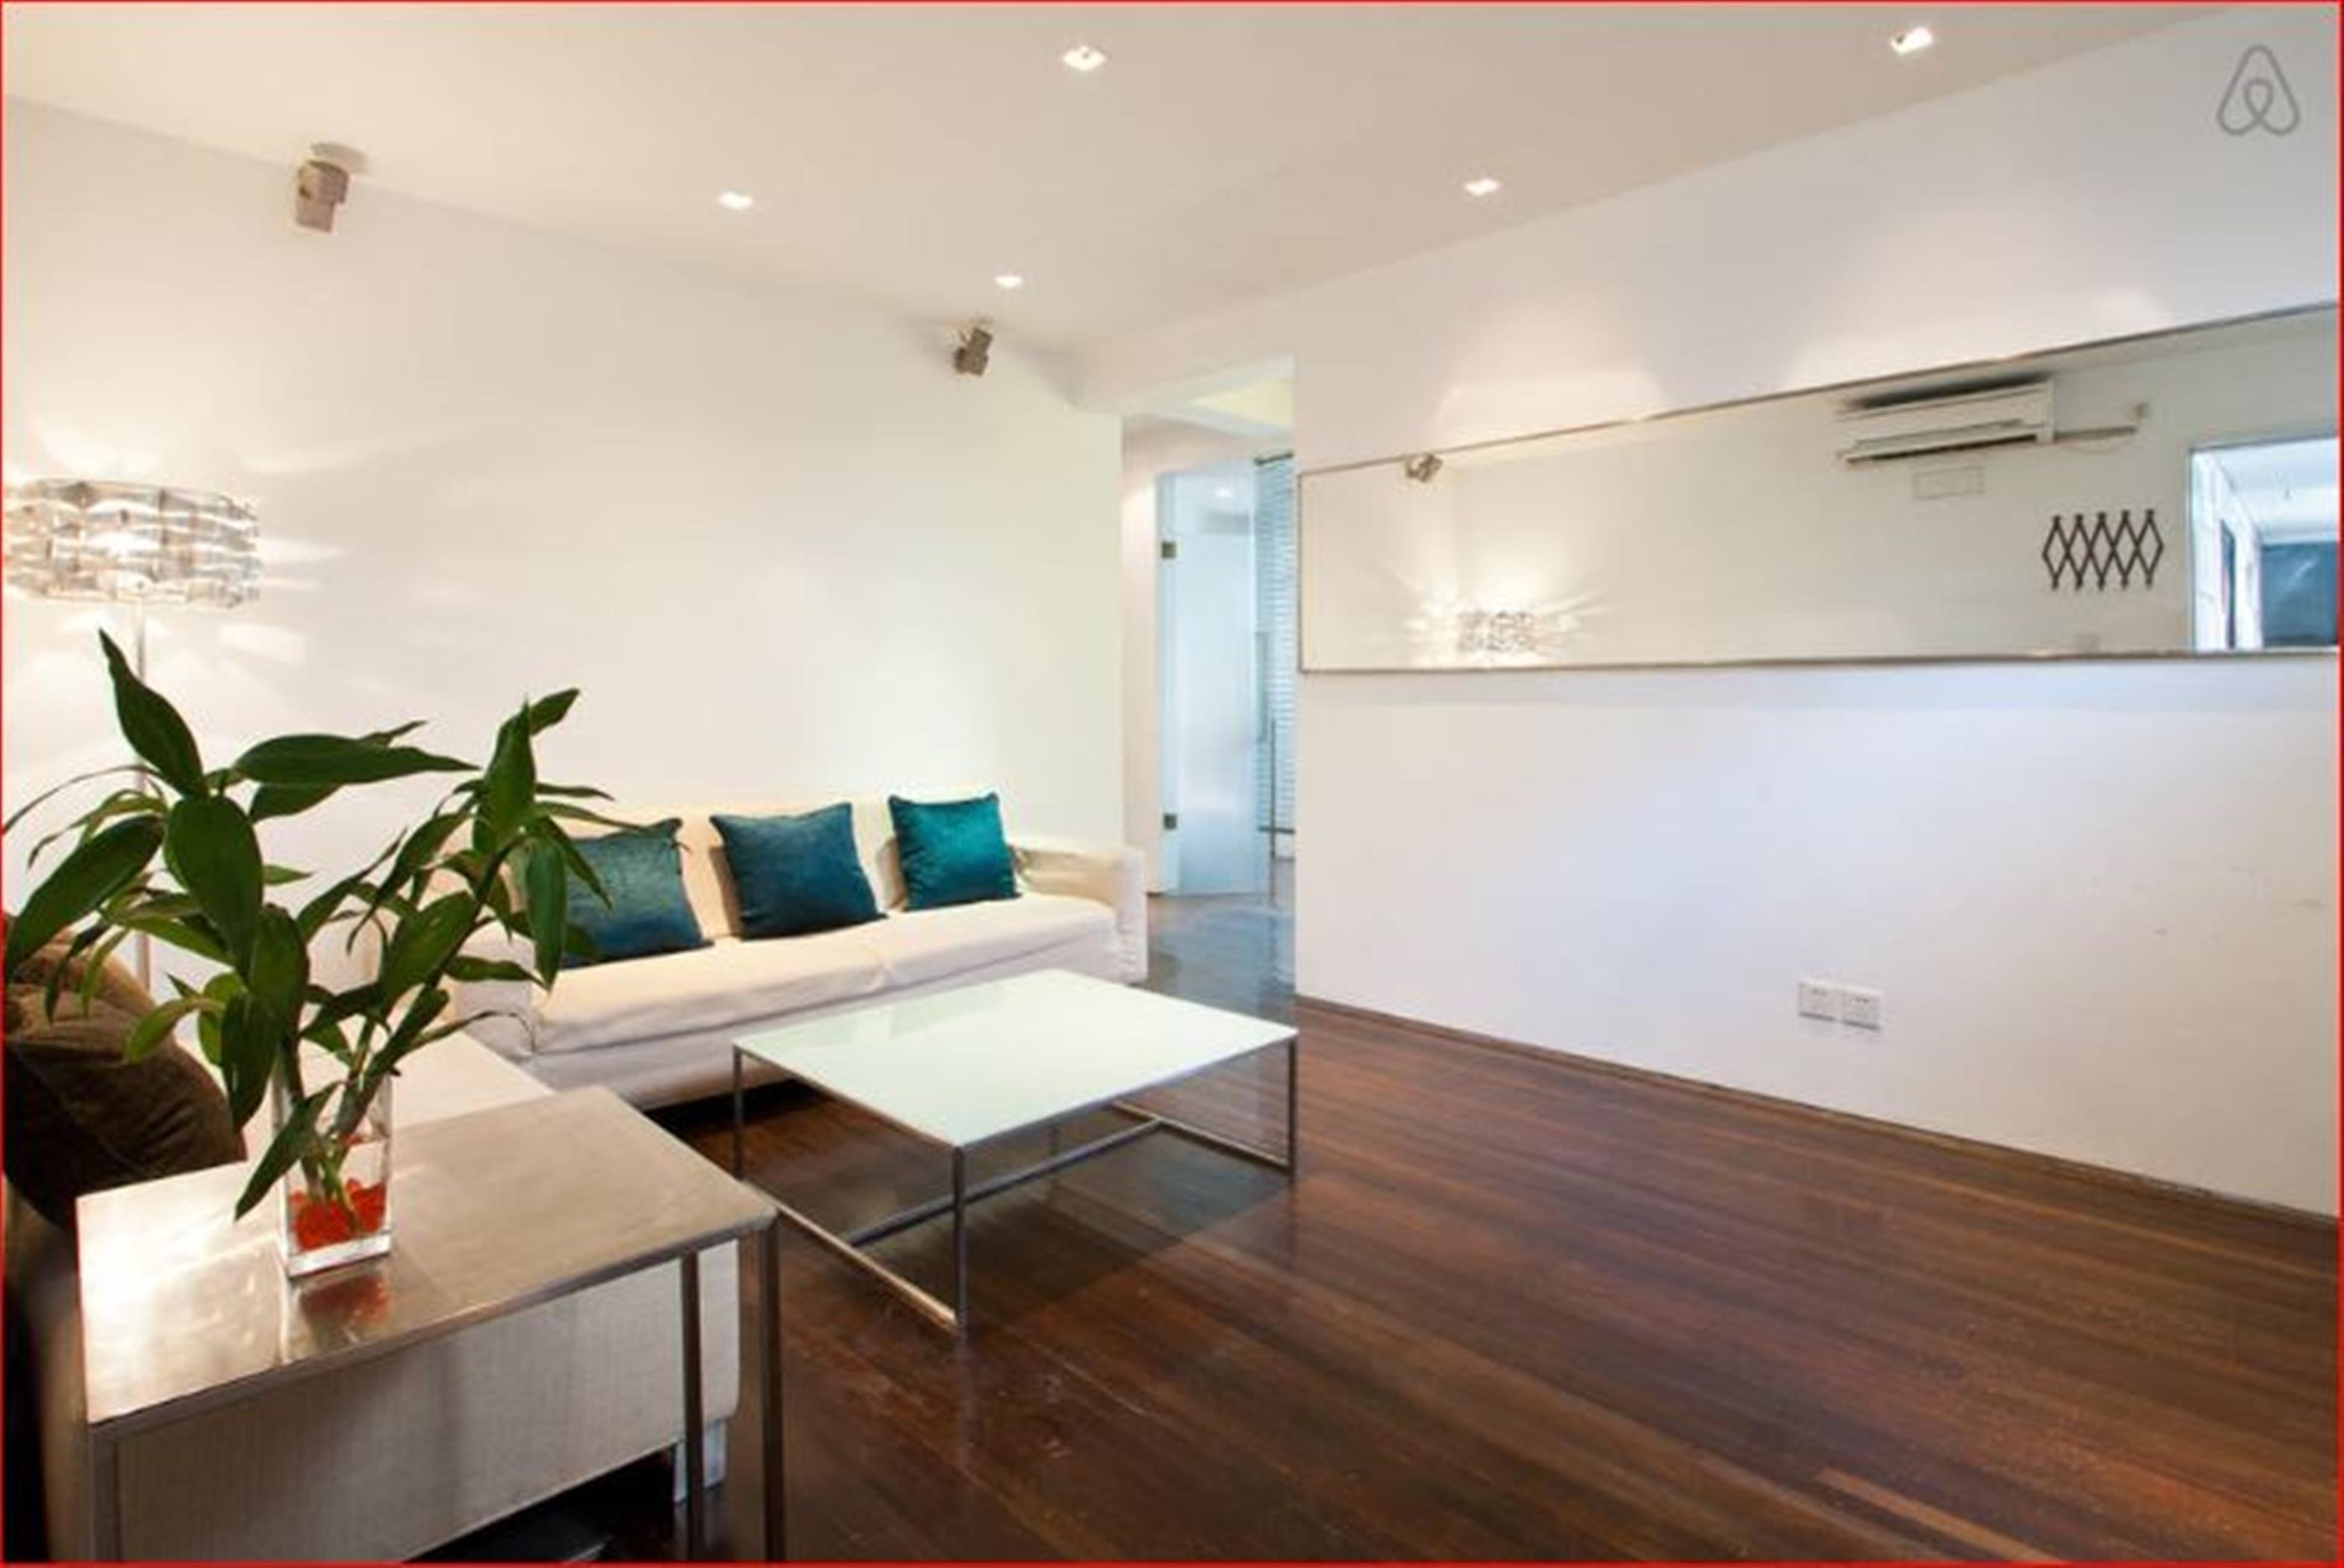 open design Renovated Bright Spacious Modern FFC 1BR Apt nr LN1/2/7/10/11 in Shanghai for Rent